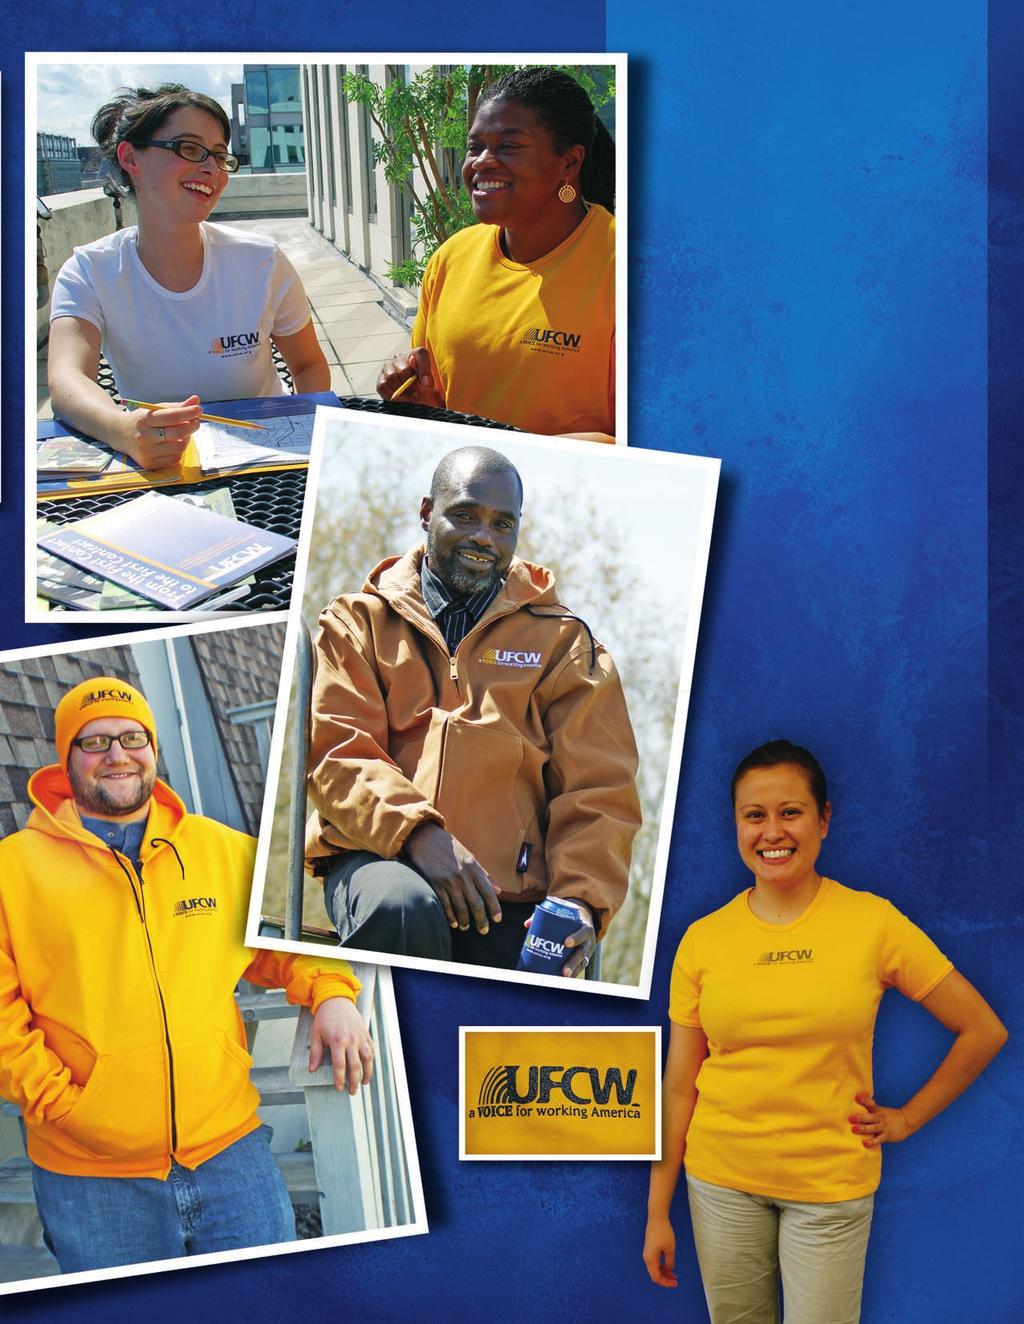 F C - Embroidered T-Shirt UFCW 8005 Sizes S-4X - Gold or Navy - Standard T-Shirt UFCW 8049 - Sizes S-4X E - Rally T-Shirt - UFCW 8045 Sizes S-4X F - Ladies Rib Tee* - UFCW 5029 Sizes S-4X - Gold or